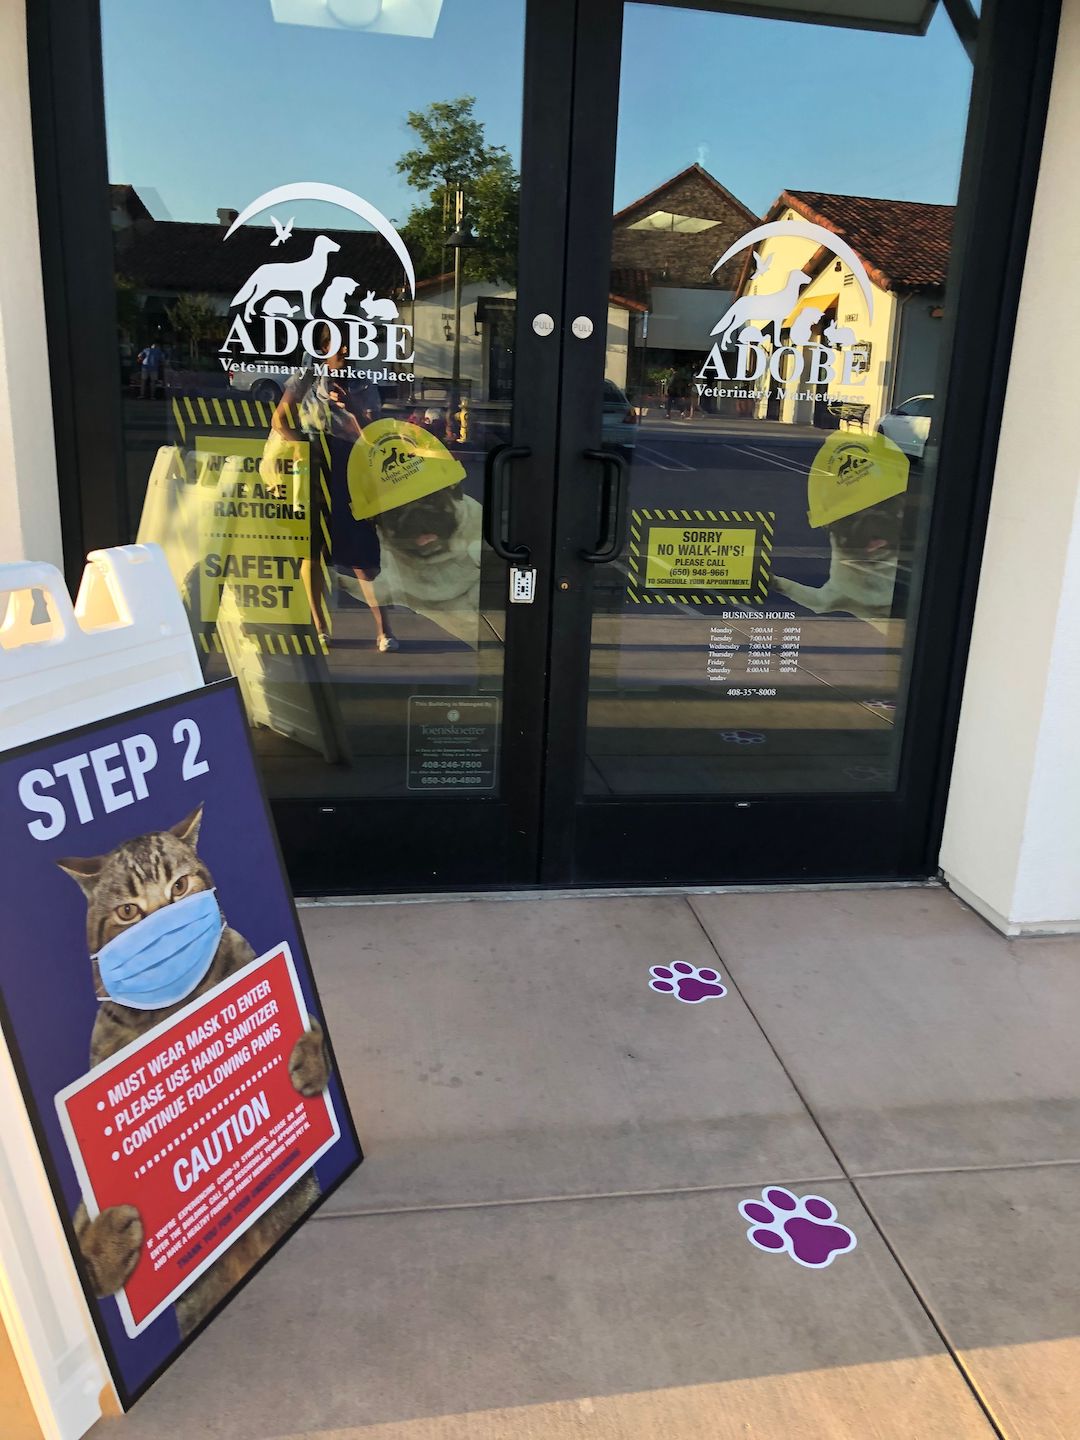 Pawprints pasted to the floor guide visitors through Dr. Koga's animal hospital in California